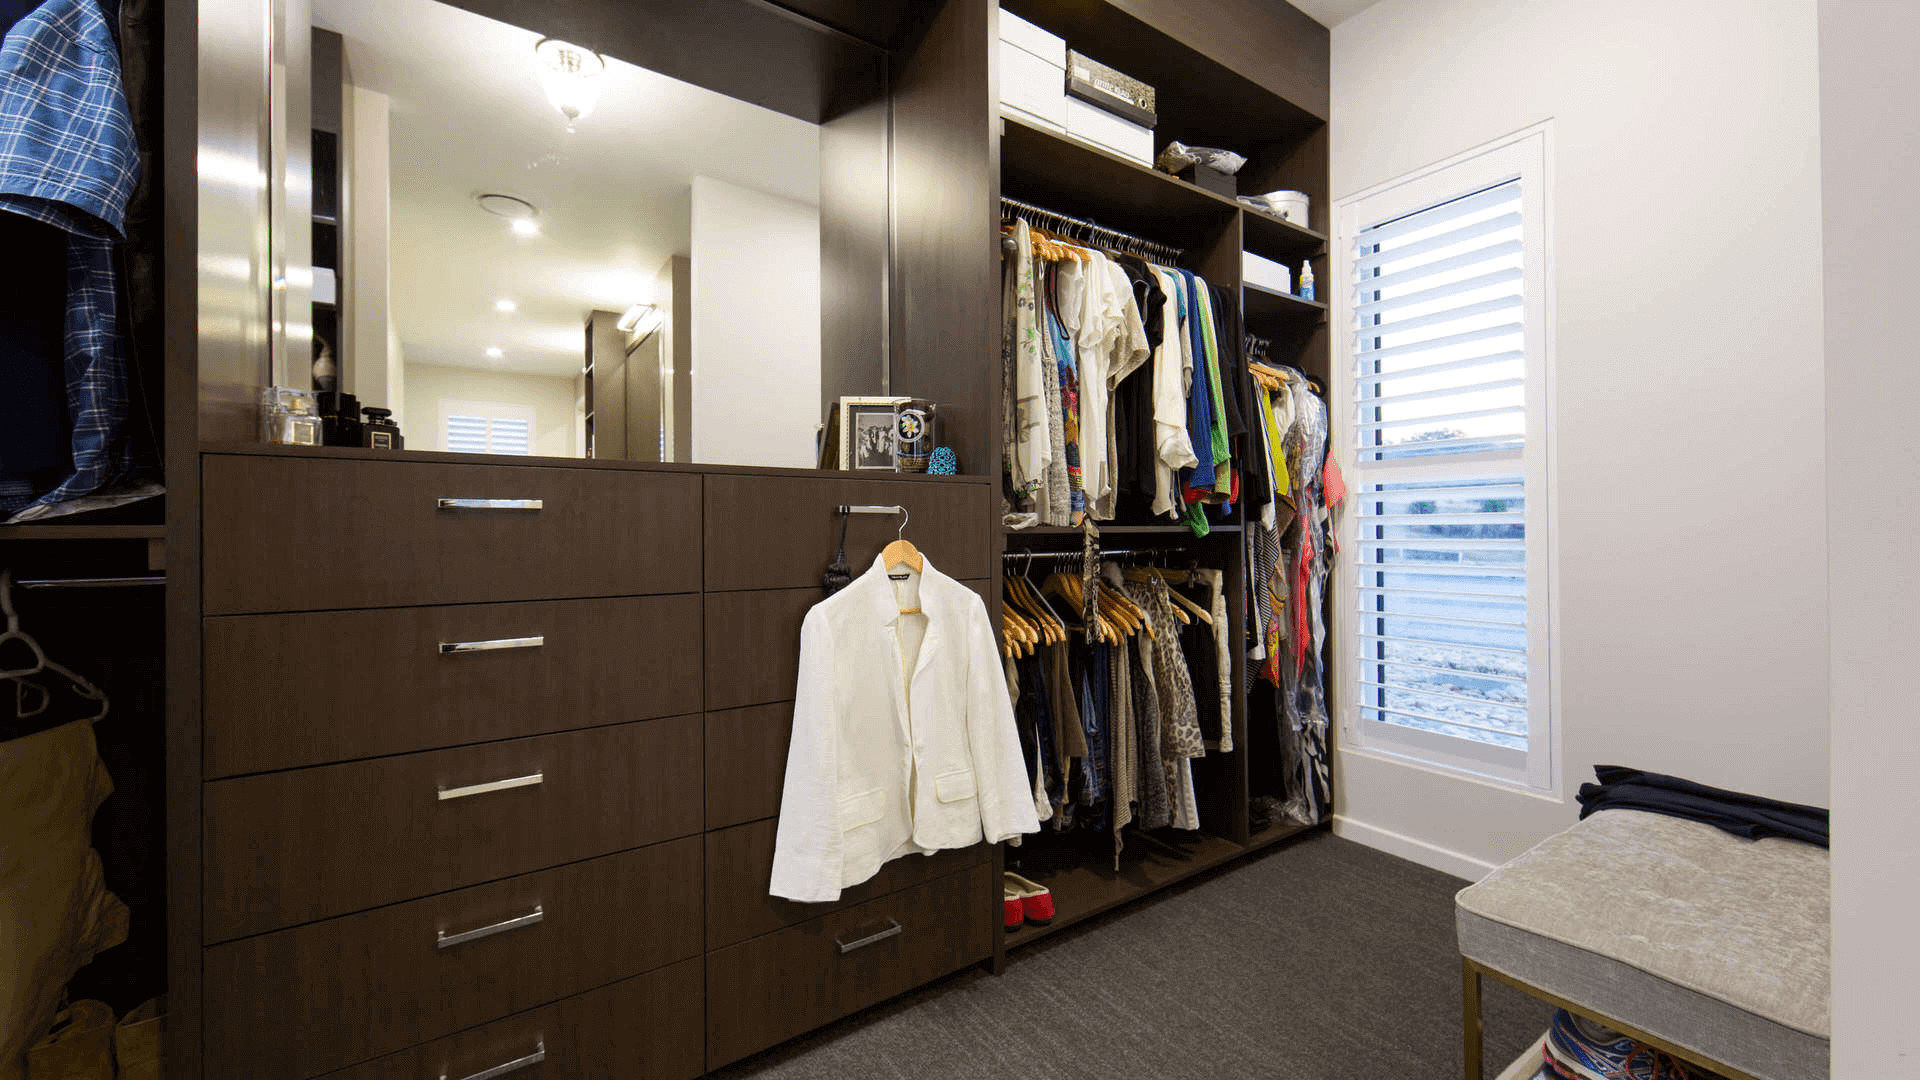 Customised walk in robe / dressing room, cupboards built in timber grain laminate with large mirror